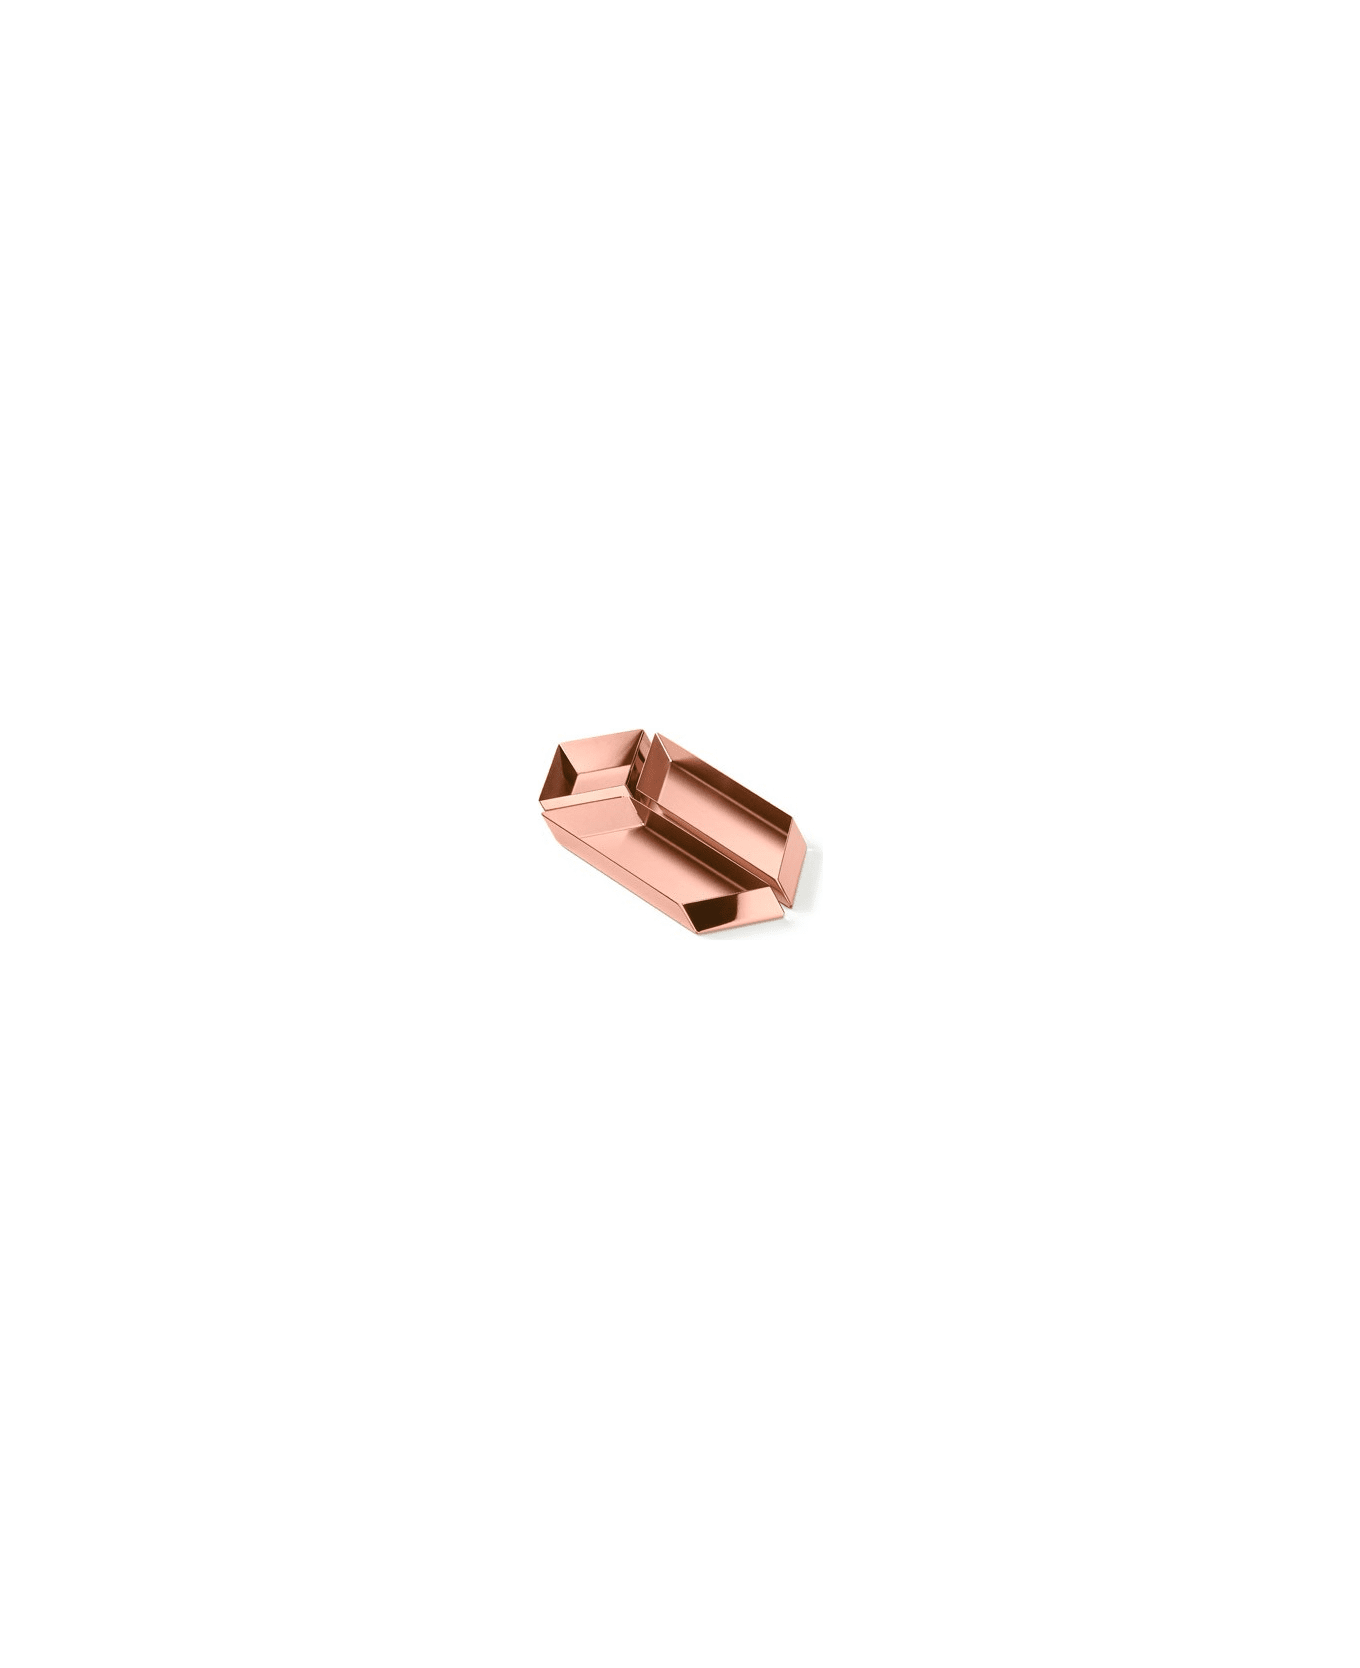 Ghidini 1961 Axonometry - Small Paralelepiped Rose Gold - Rose gold